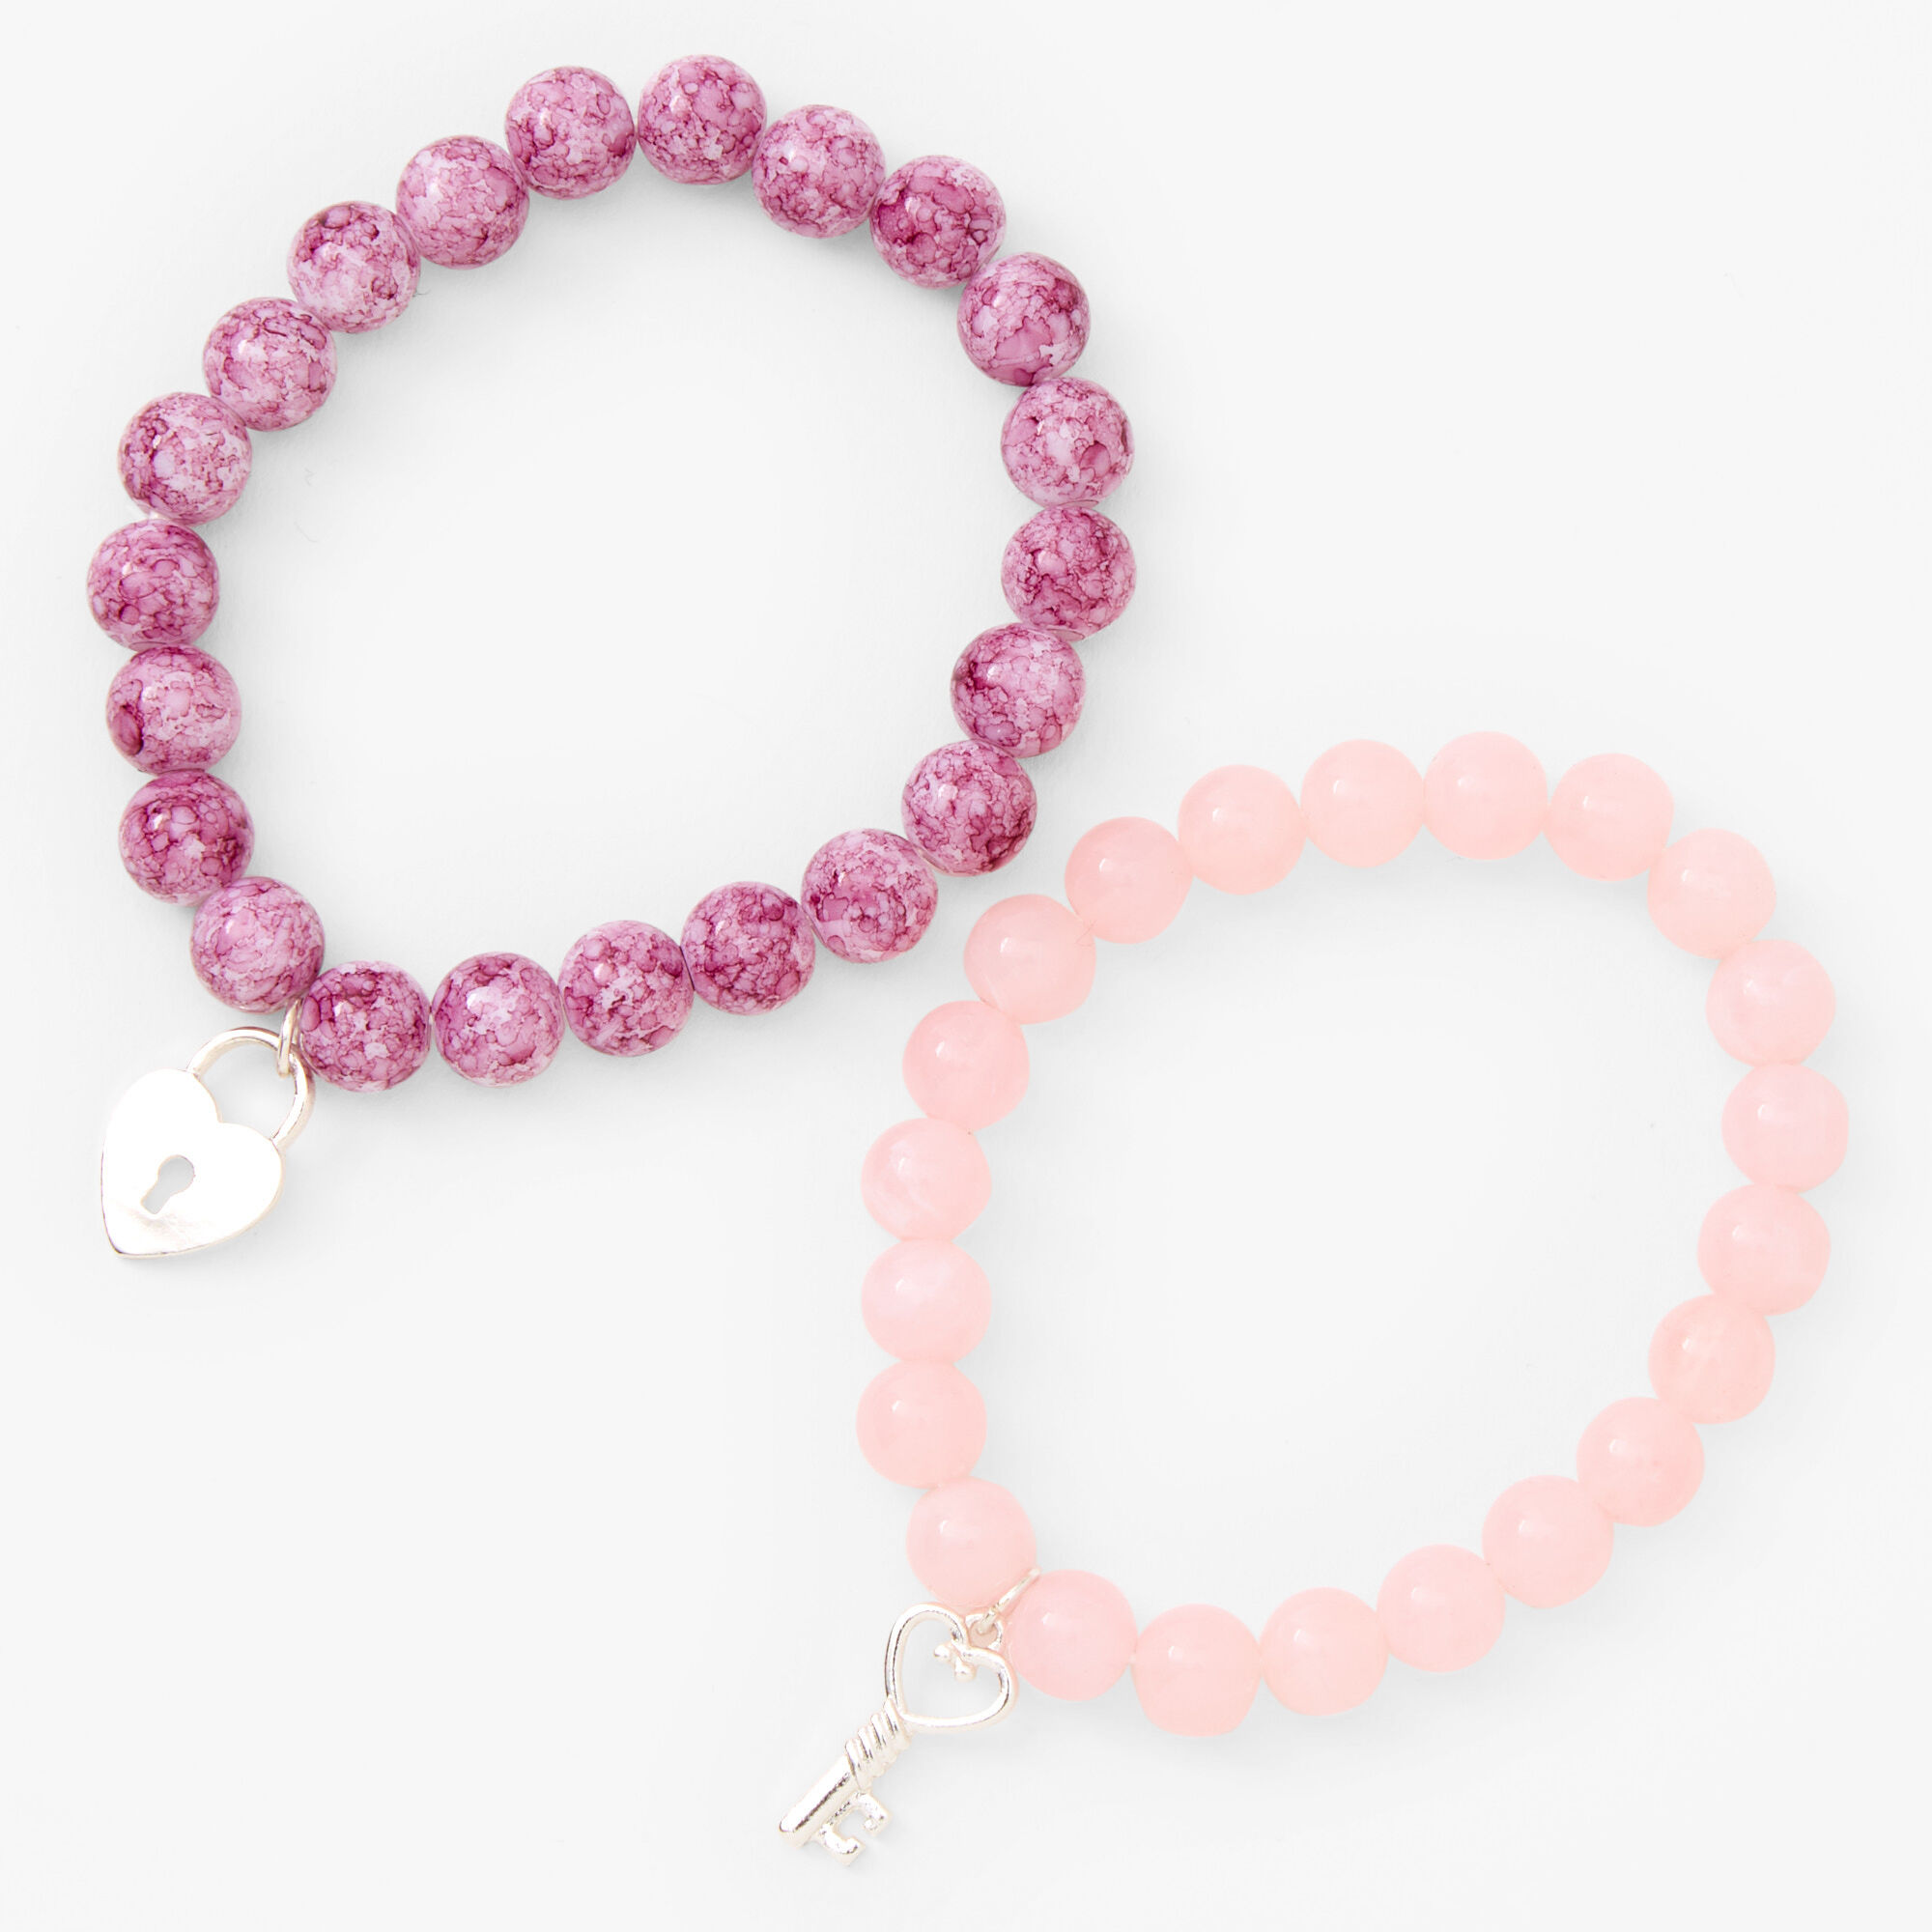 Claire's Heart Lock & Key Beaded Stretch Bracelet - Blush Pink | 2 Pack | Silver